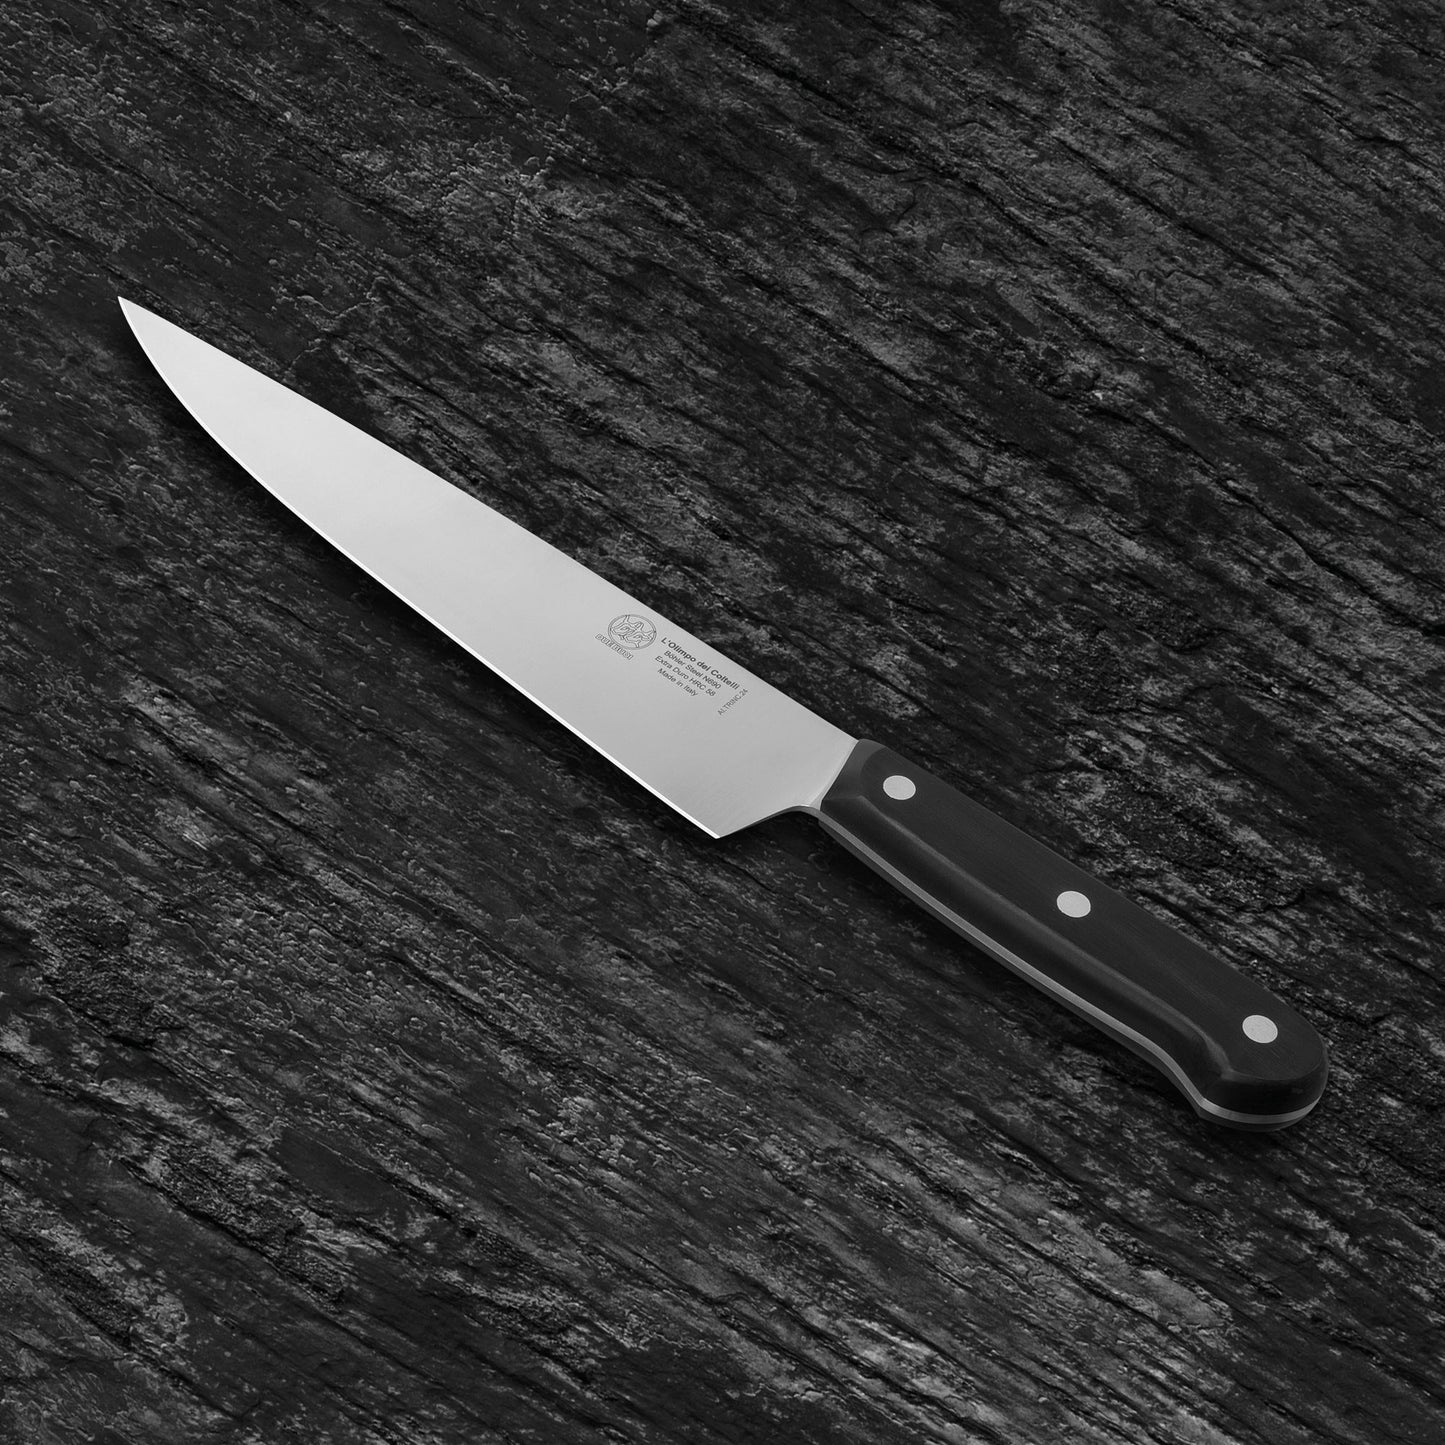 
                  
                    Chef Kitchen Knife - Blade 9.04" - N690 Stainless Steel - Hrc 60 - Black Technical Polymer Handle
                  
                